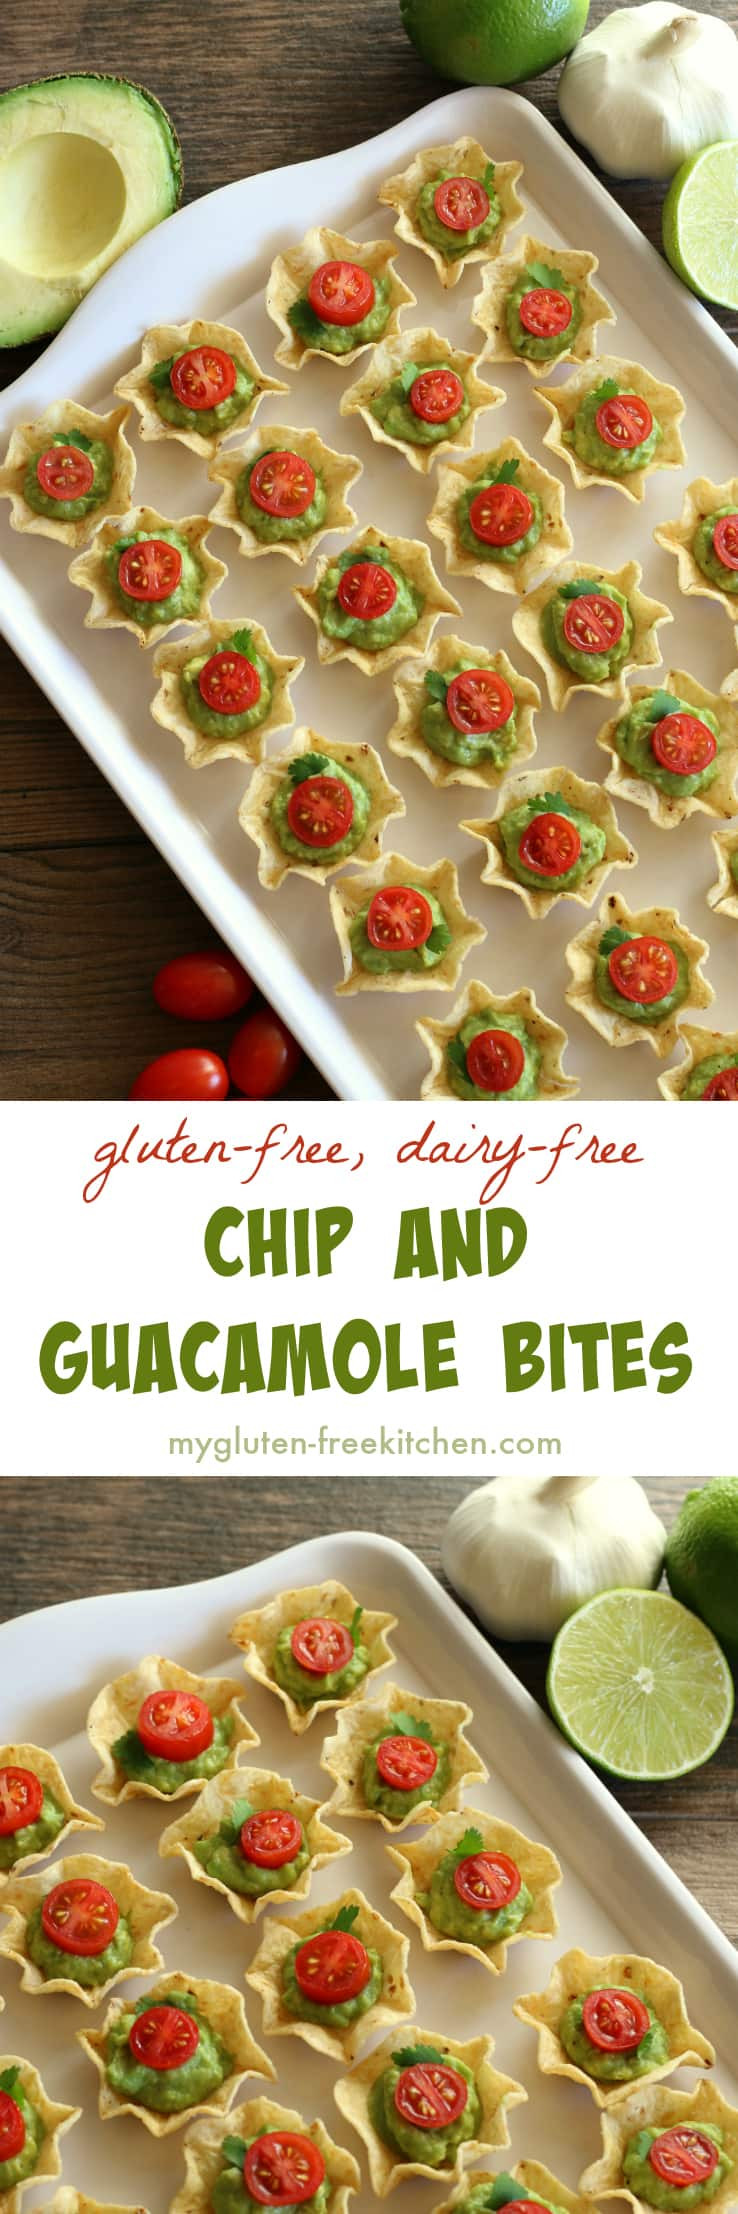 Gluten Free Dairy Free Appetizers
 Gluten free Chip and Guacamole Bites